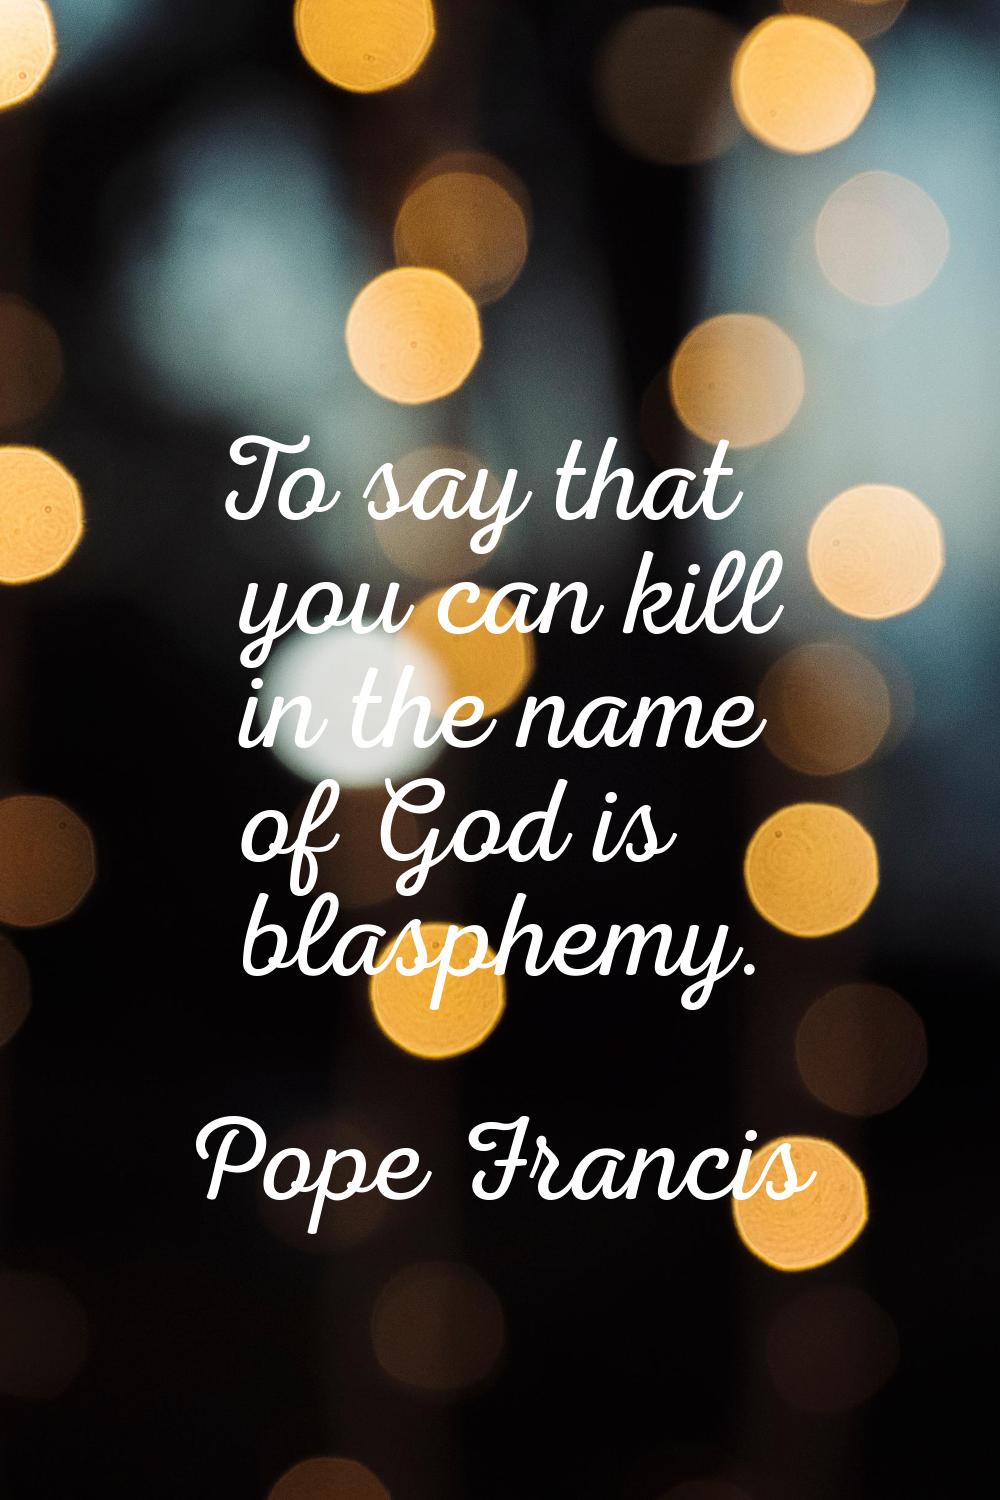 To say that you can kill in the name of God is blasphemy.